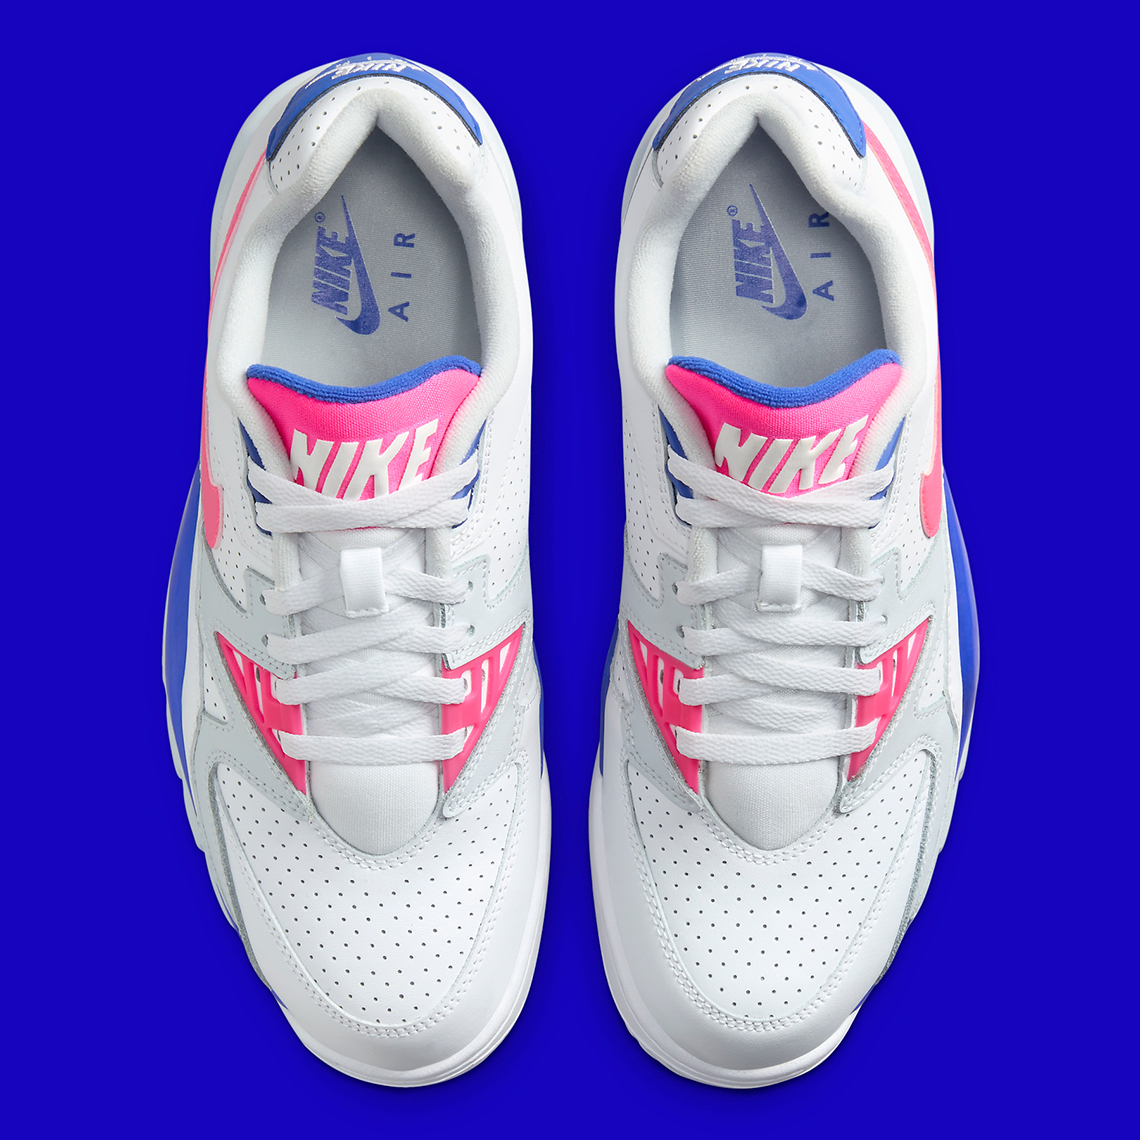 nike Patch cross trainer low white concord pink fn6887 100 7